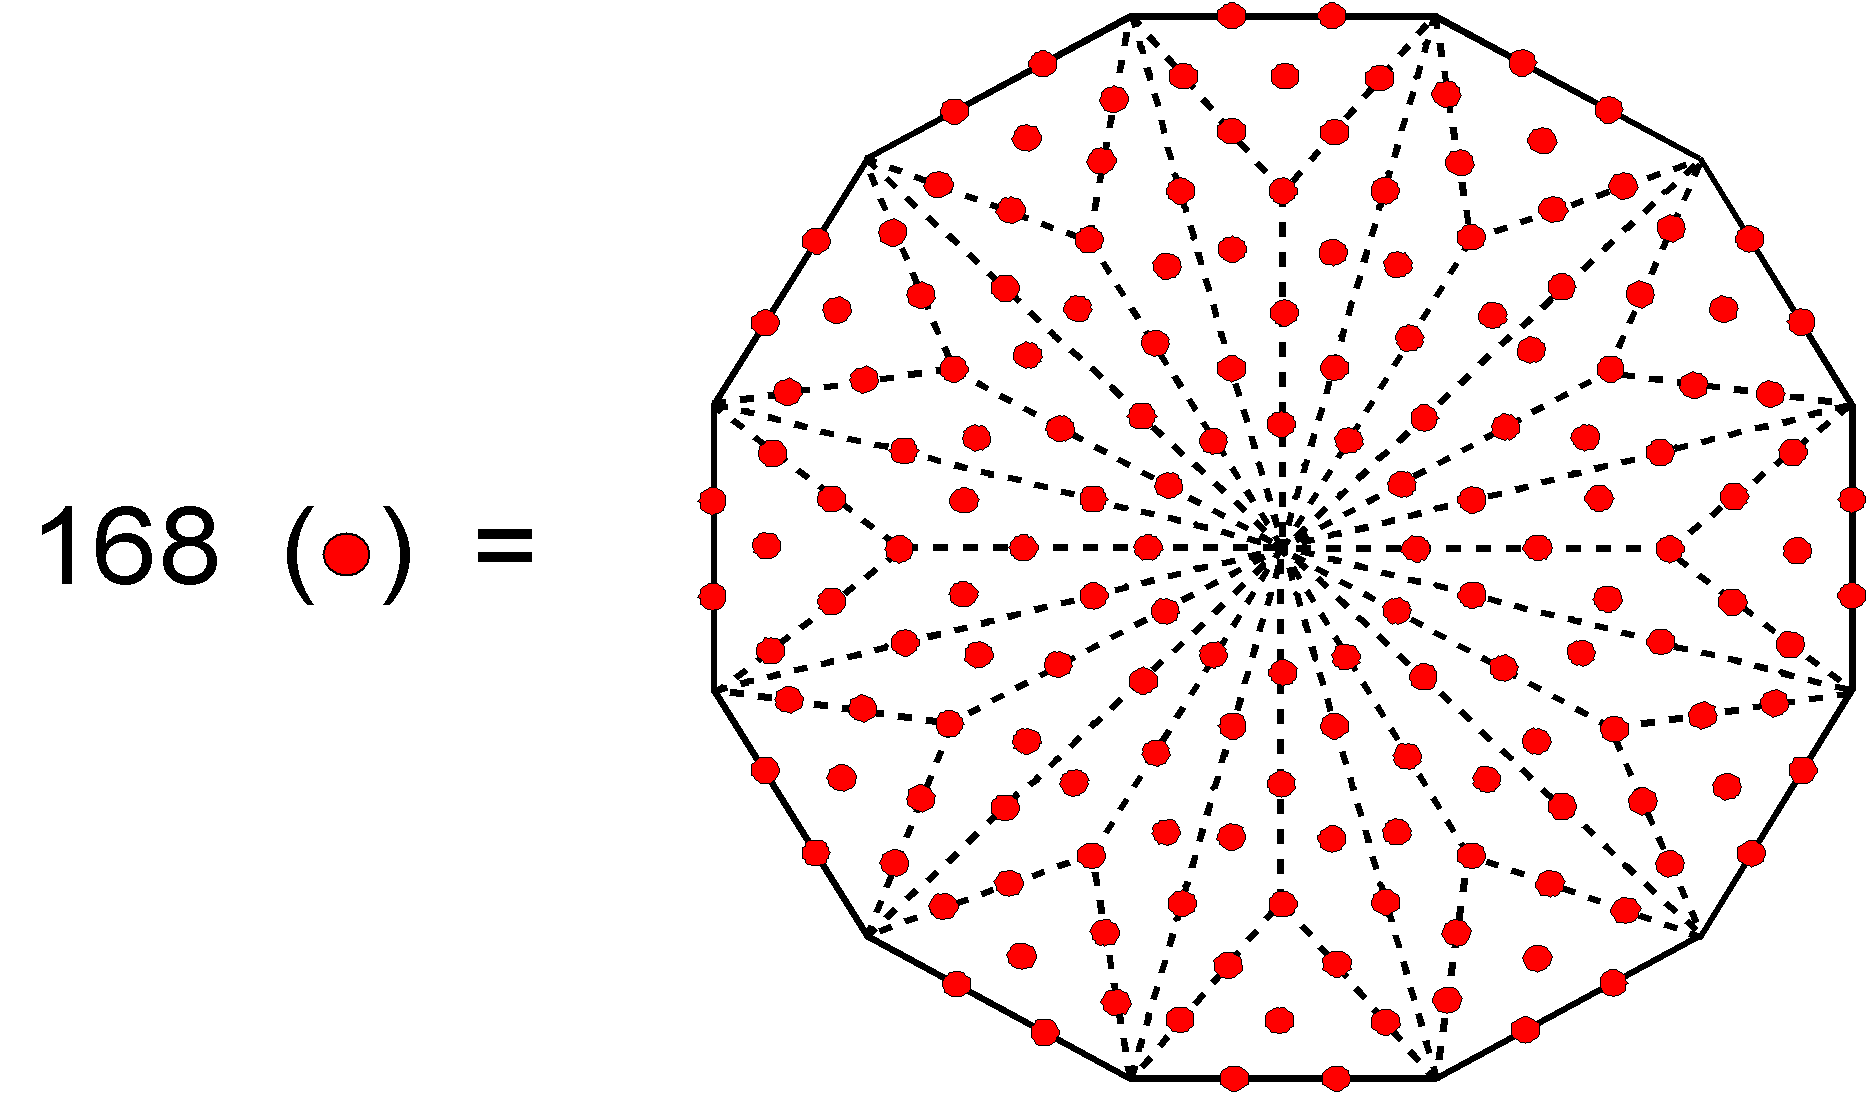 168 yods in Type B dodecagon other than corners of sectors